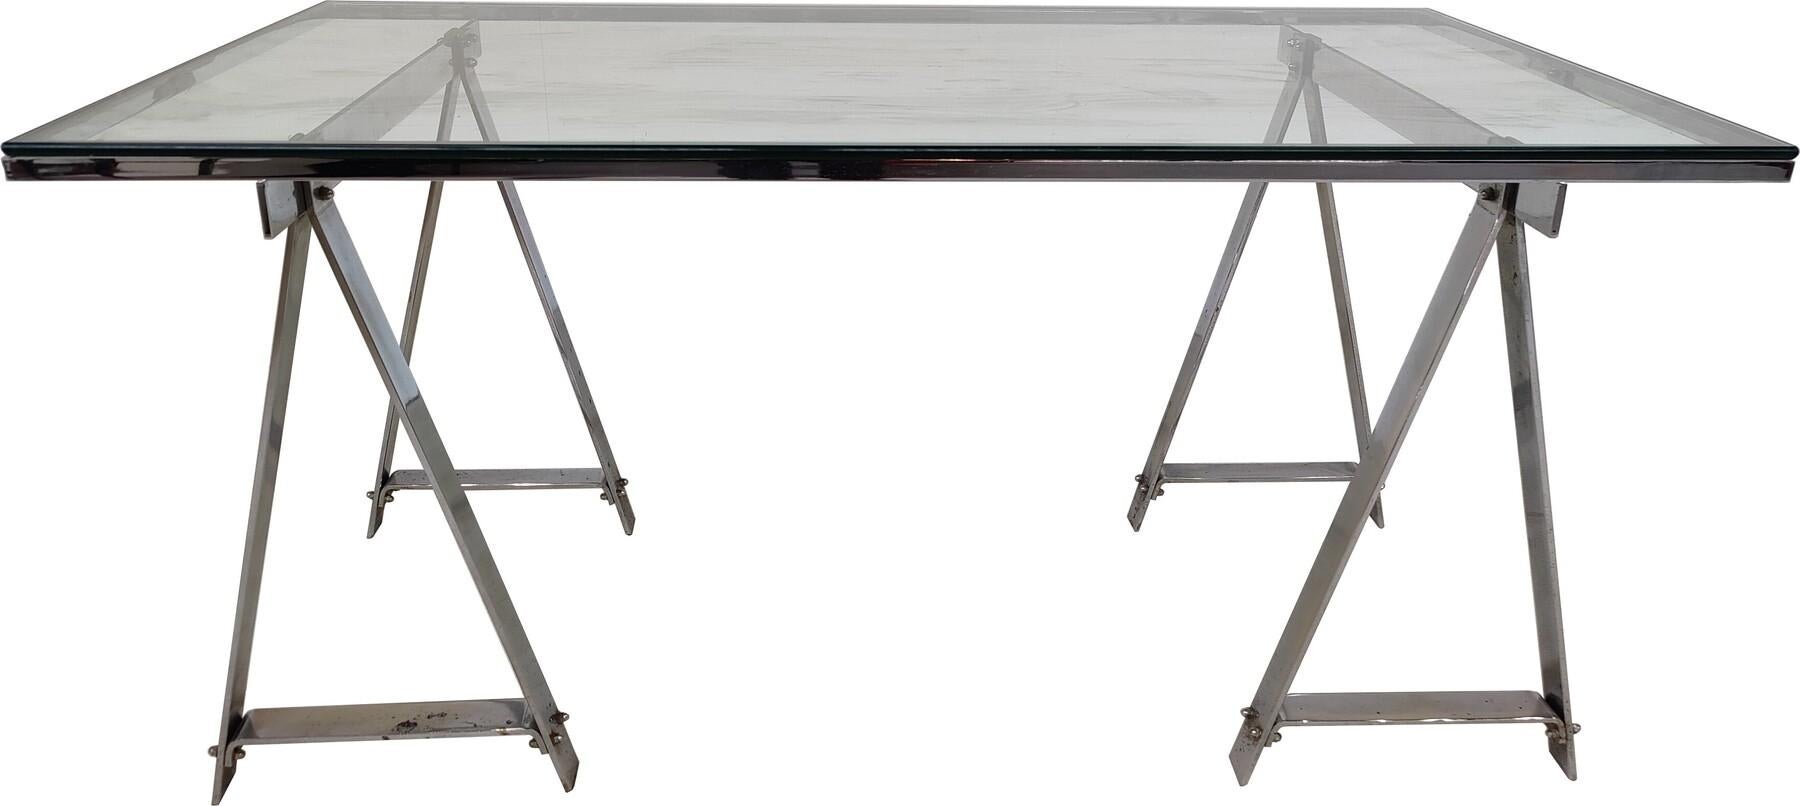 Mid-Century Modern Dining Table/Desk, Chrome and Glass, Italy, 1970s For Sale 5